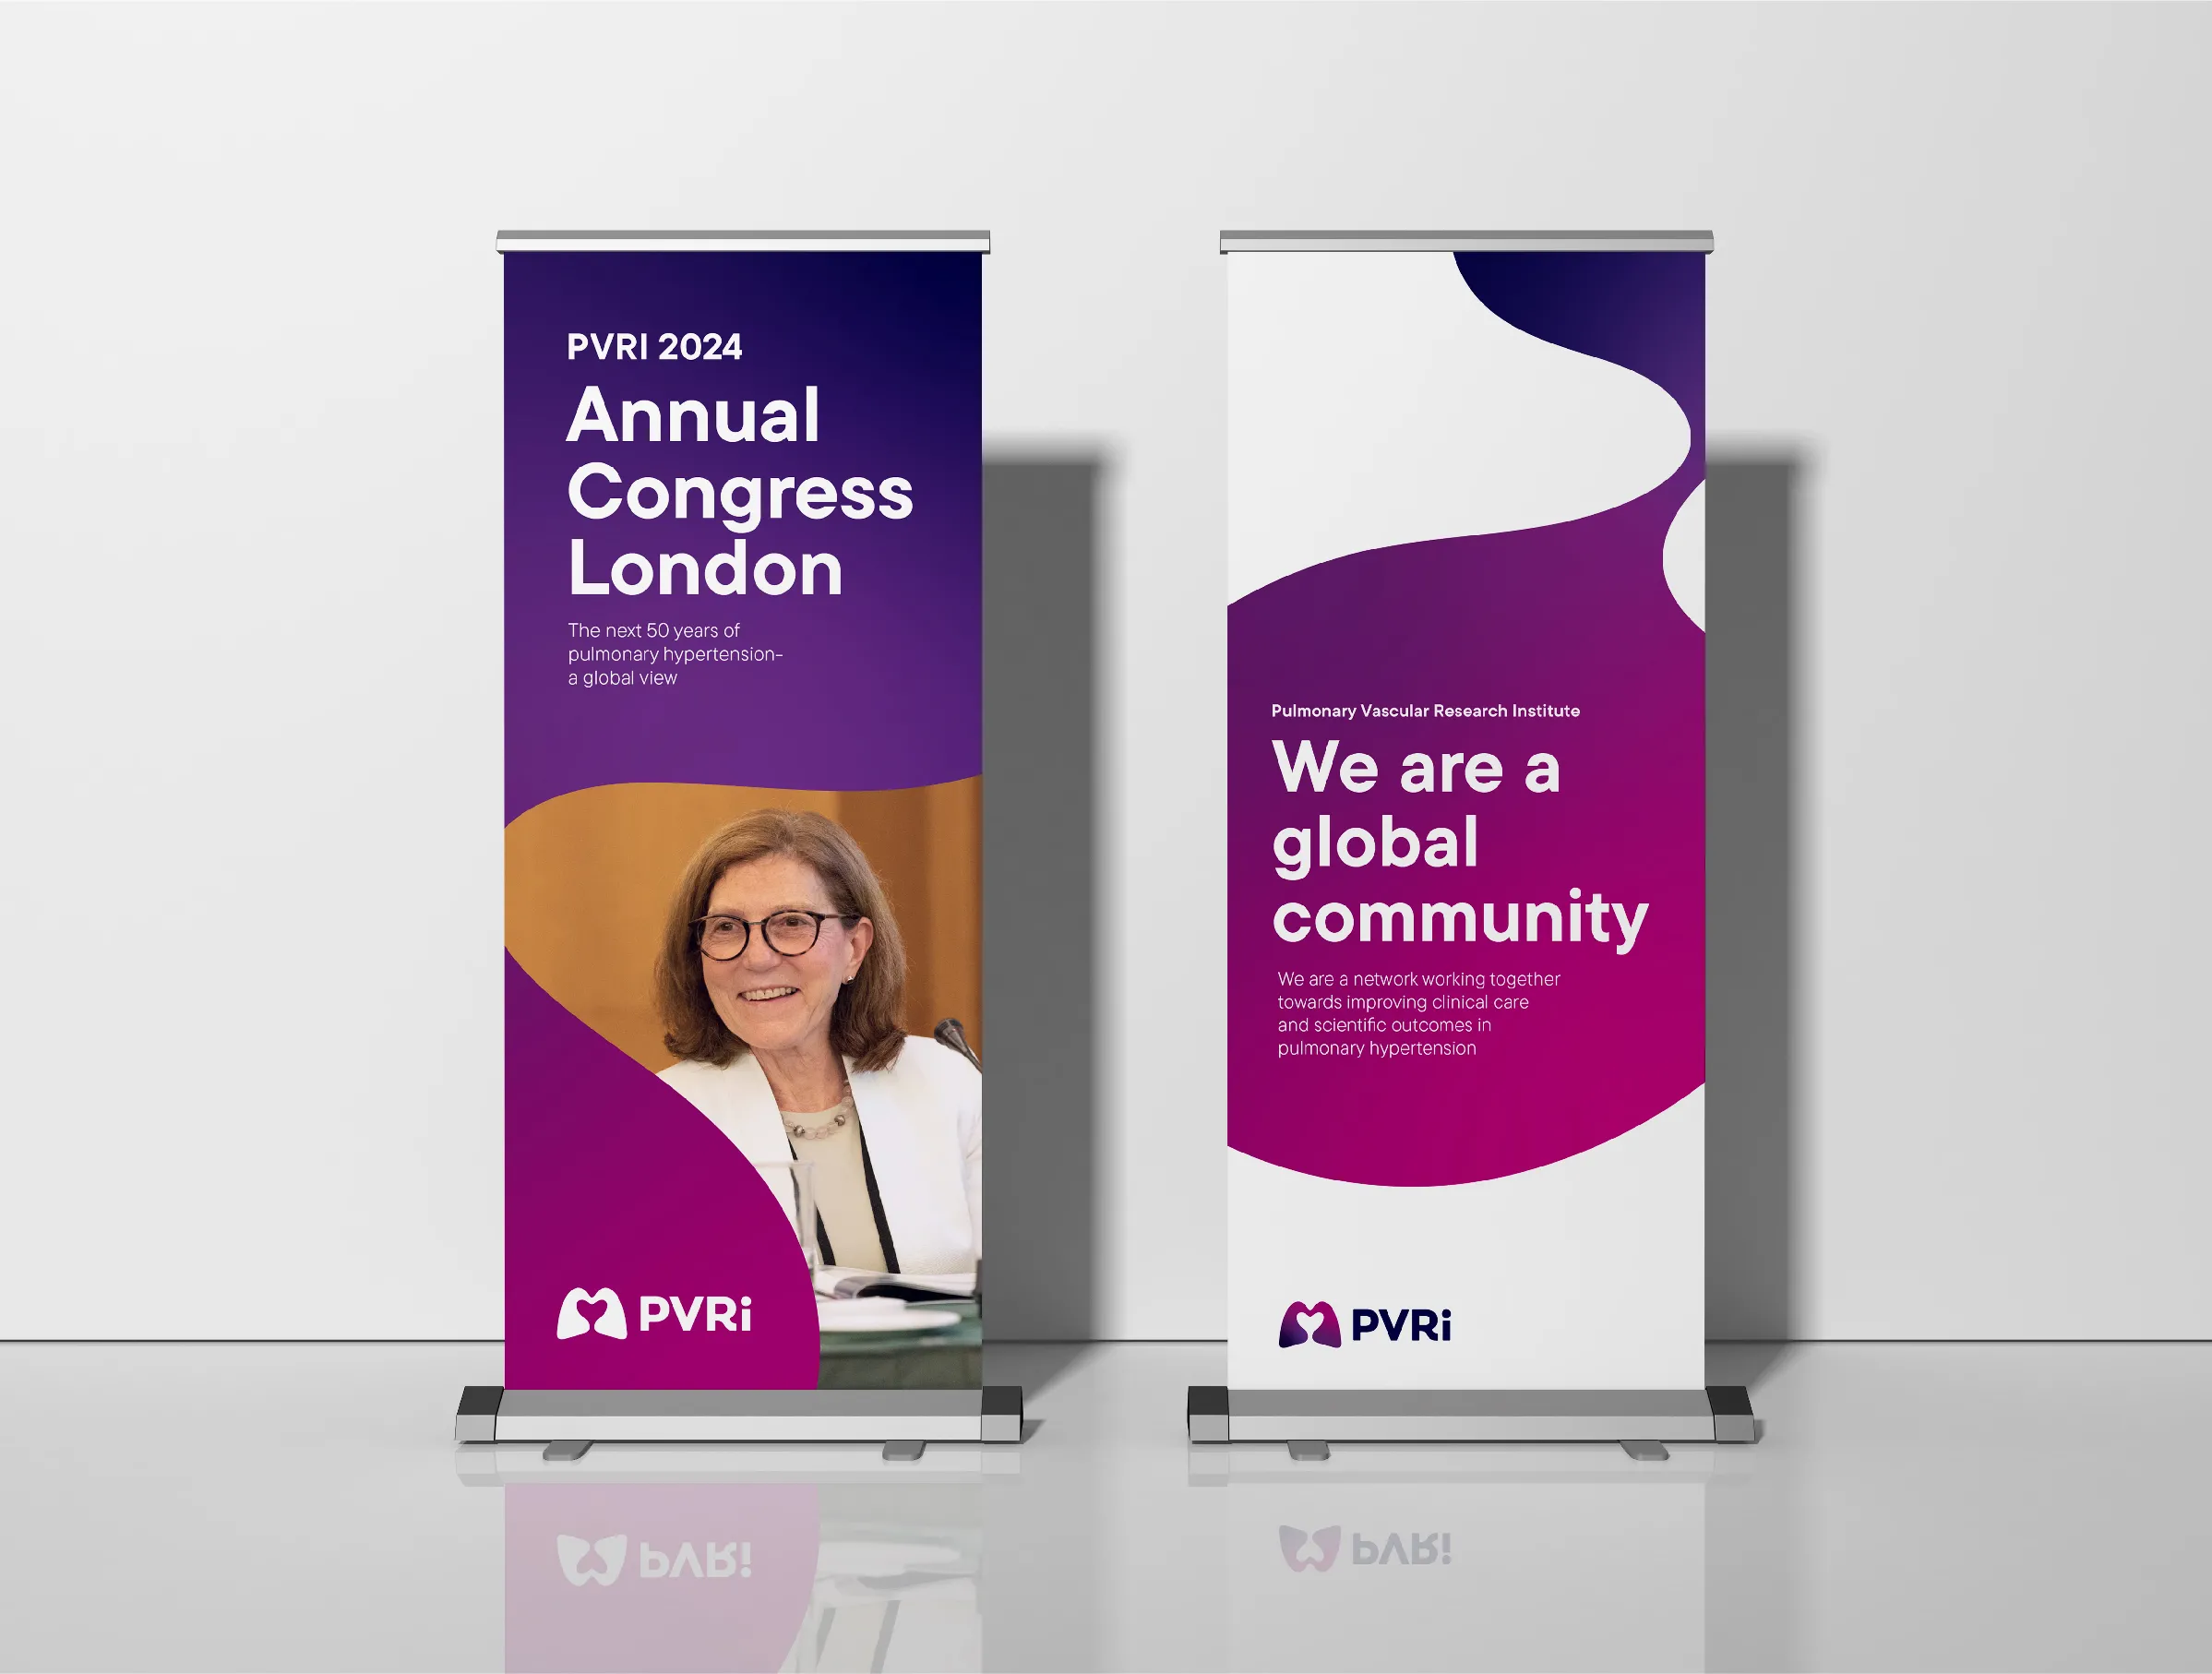 Pair of PVRI branded banner stands for an event